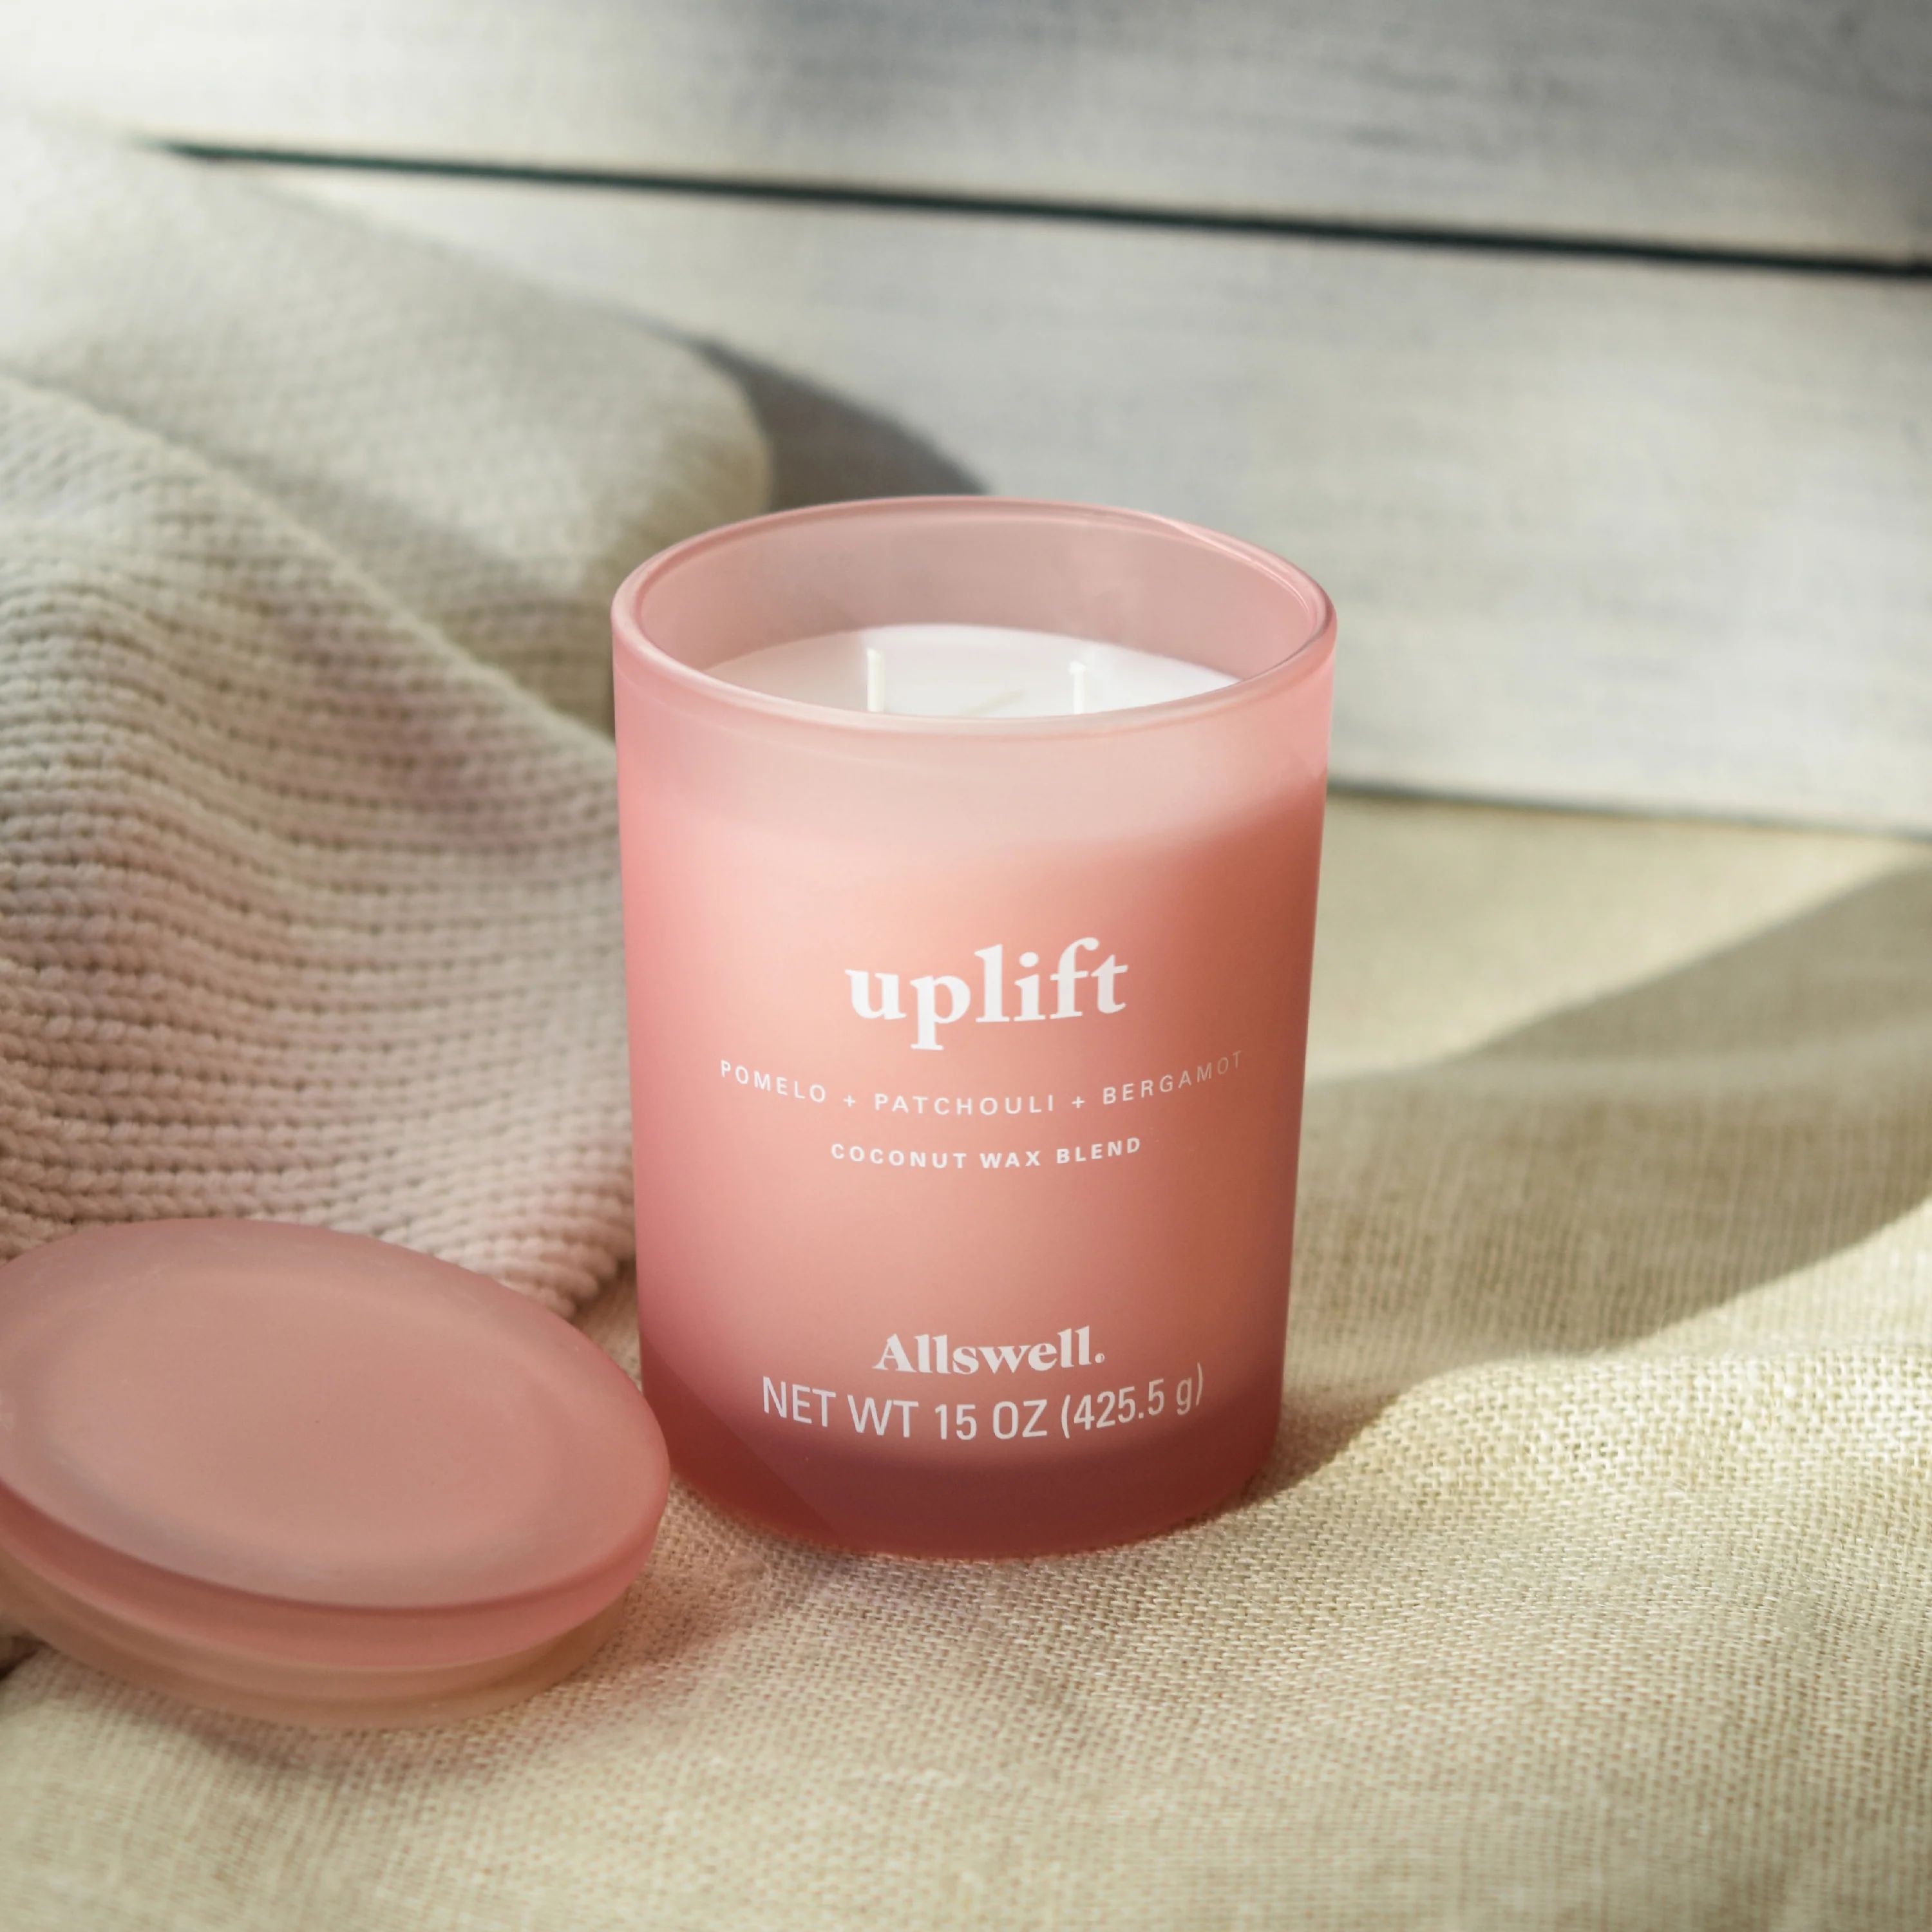 Uplift (Pomelo + Patchouli + Bergamot) 2-Wick Spa Candle | Allswell Home